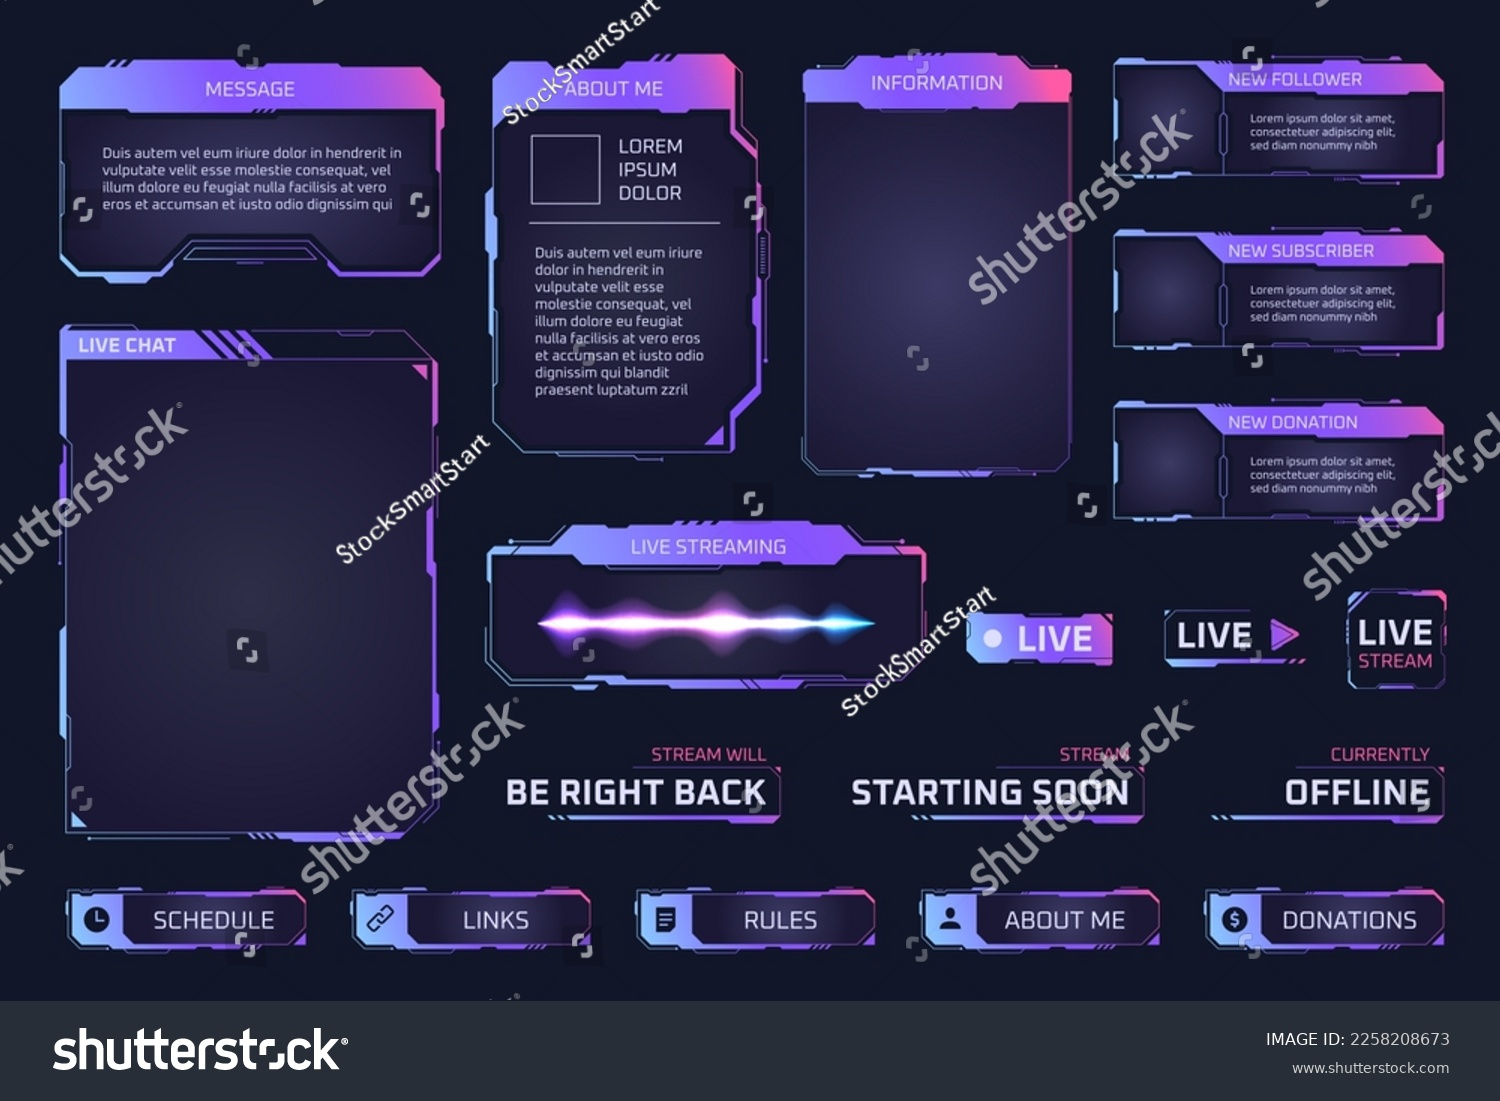 Game stream panels. Twitch streaming overlay frames for gamers leaderboard, hud glowing digital screen template gui online interface futuristic cyber buttons ui vector illustration of game live frame #2258208673